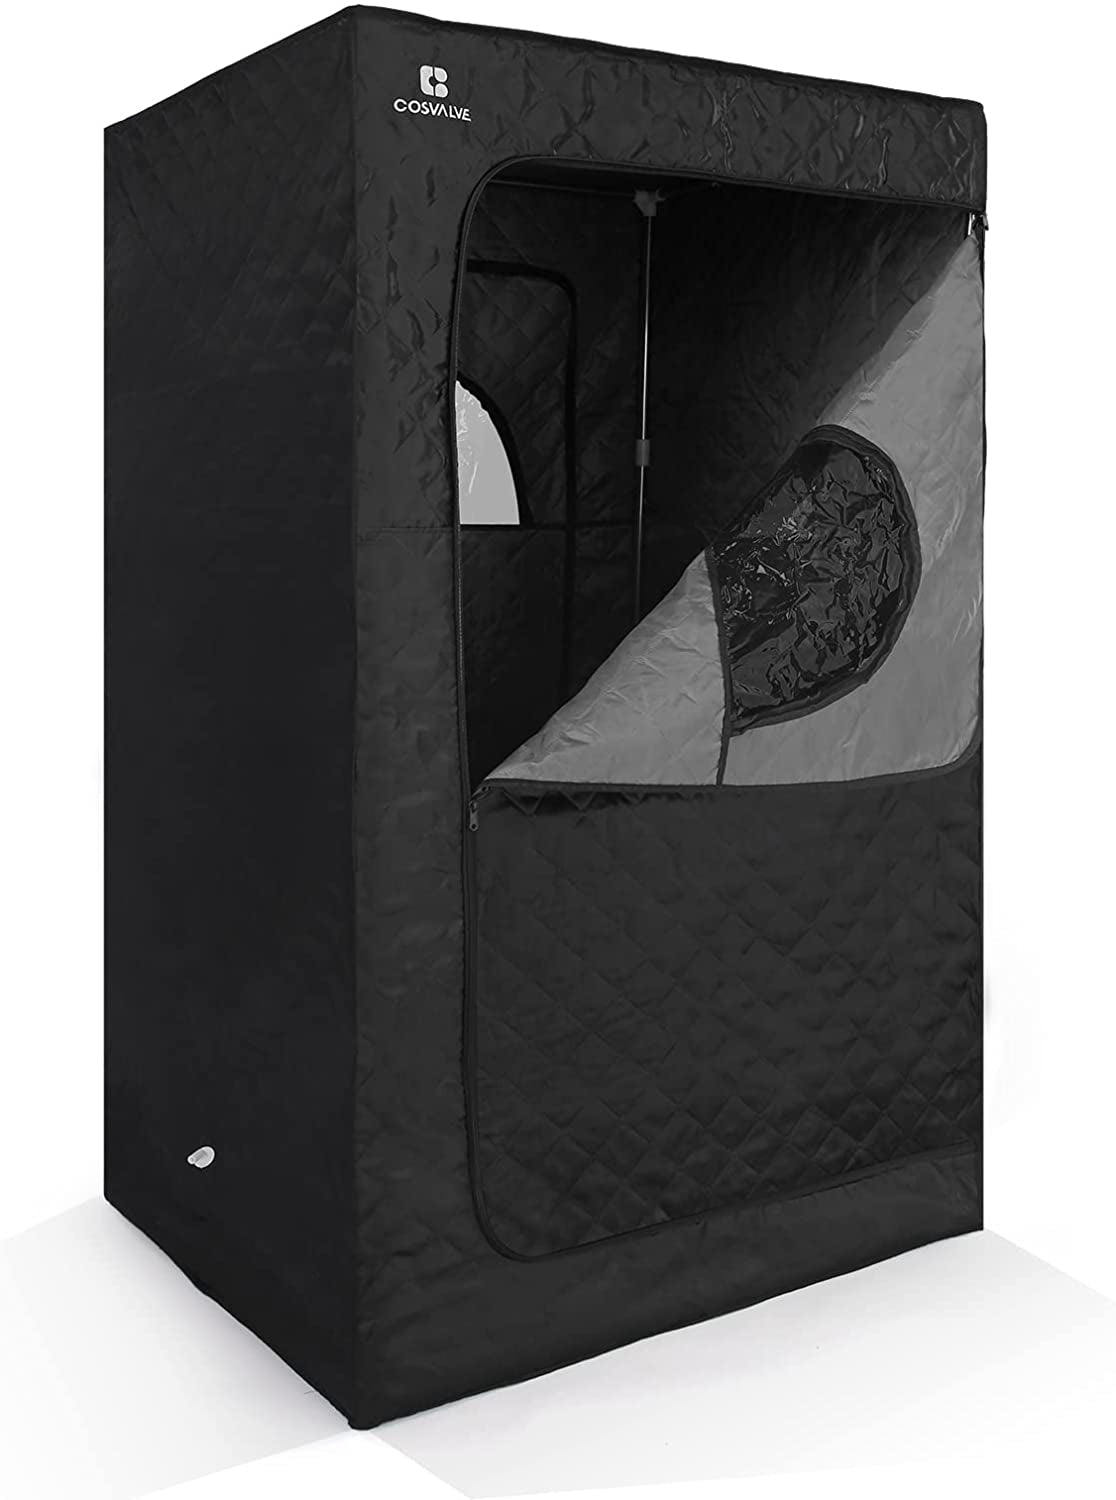 Portable Steam Sauna for Home, Full Size Personal Steam Room Sauna Box Kit with 2.6L 1000W Steam Generator, Remote Control, Indoor Sauna Tent for Home Spa Relaxation (39.3'' X 31.5''X 67'') - LynkHouse